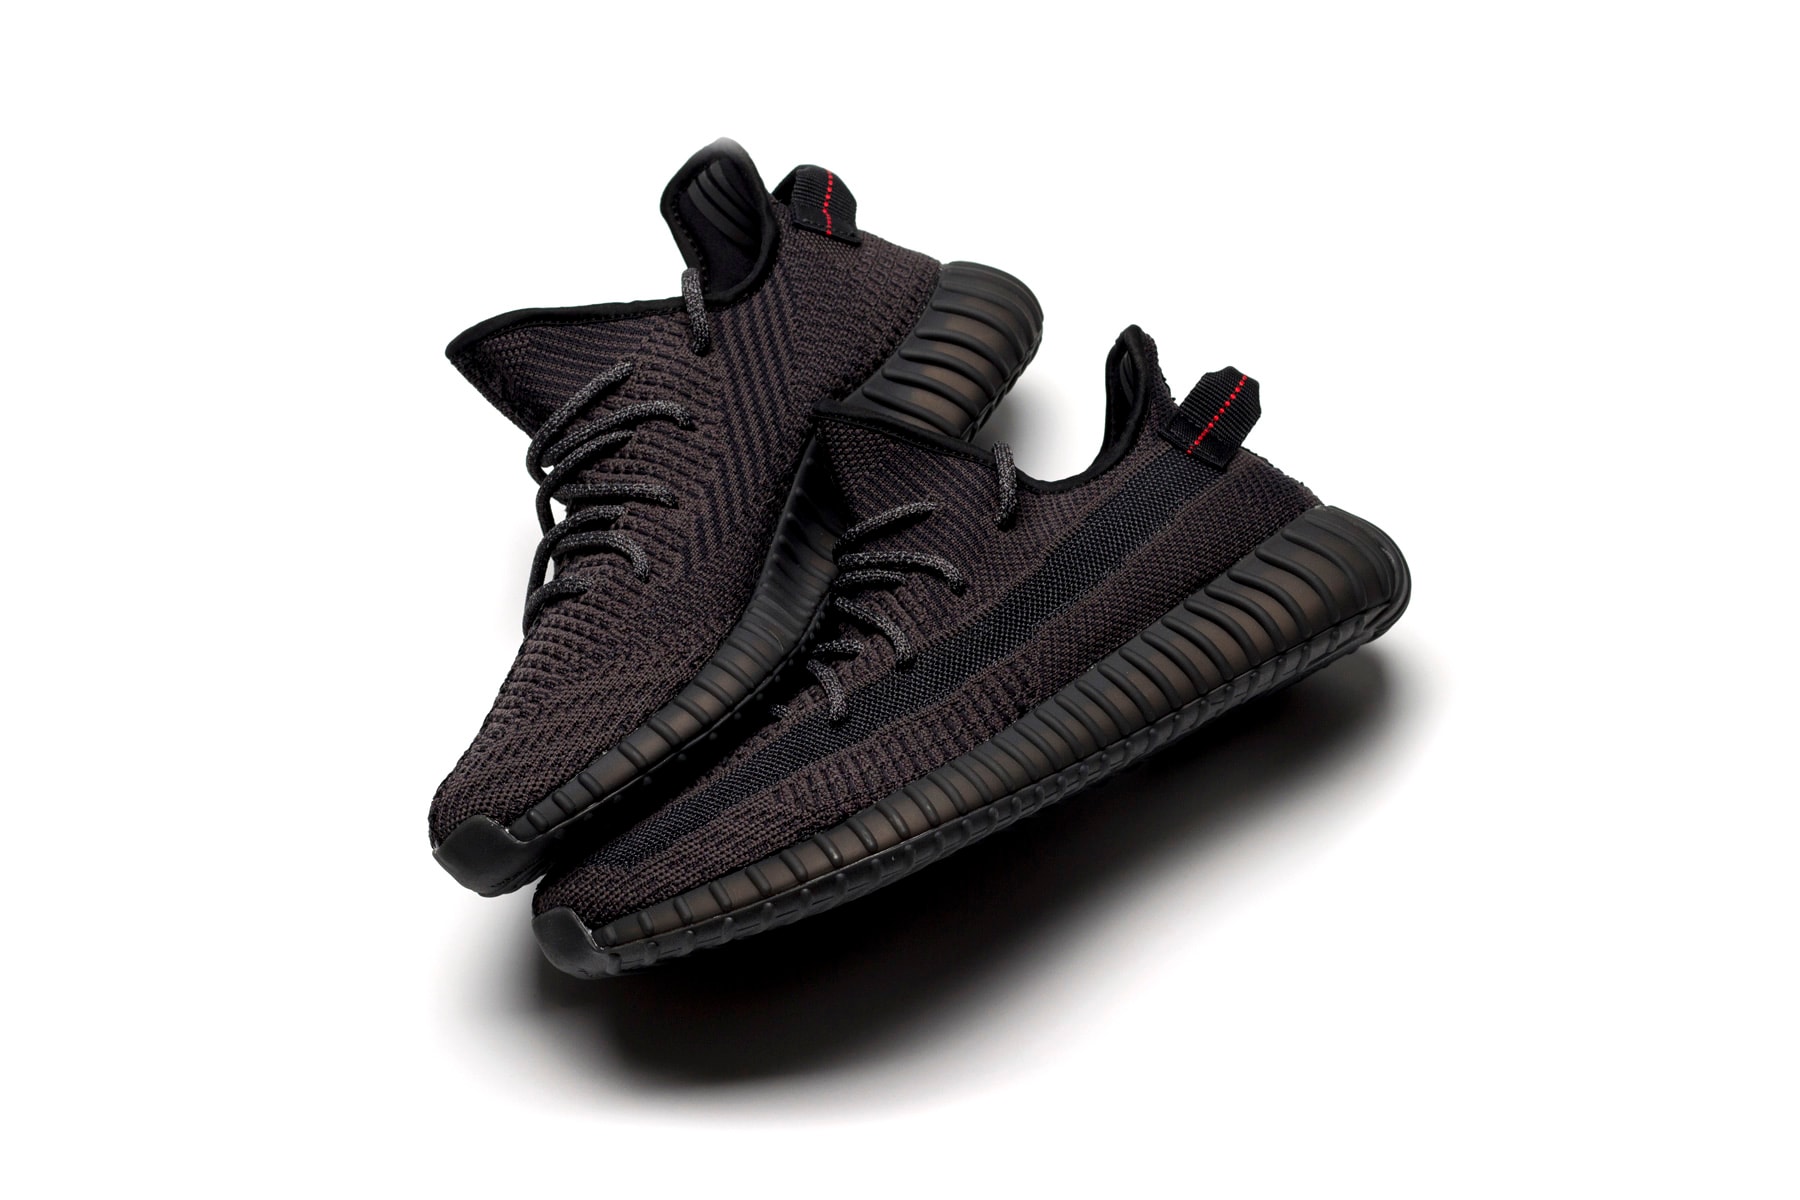 All-Black adidas YEEZY Boost 350 V2 First Look kanye west three stripes release date june